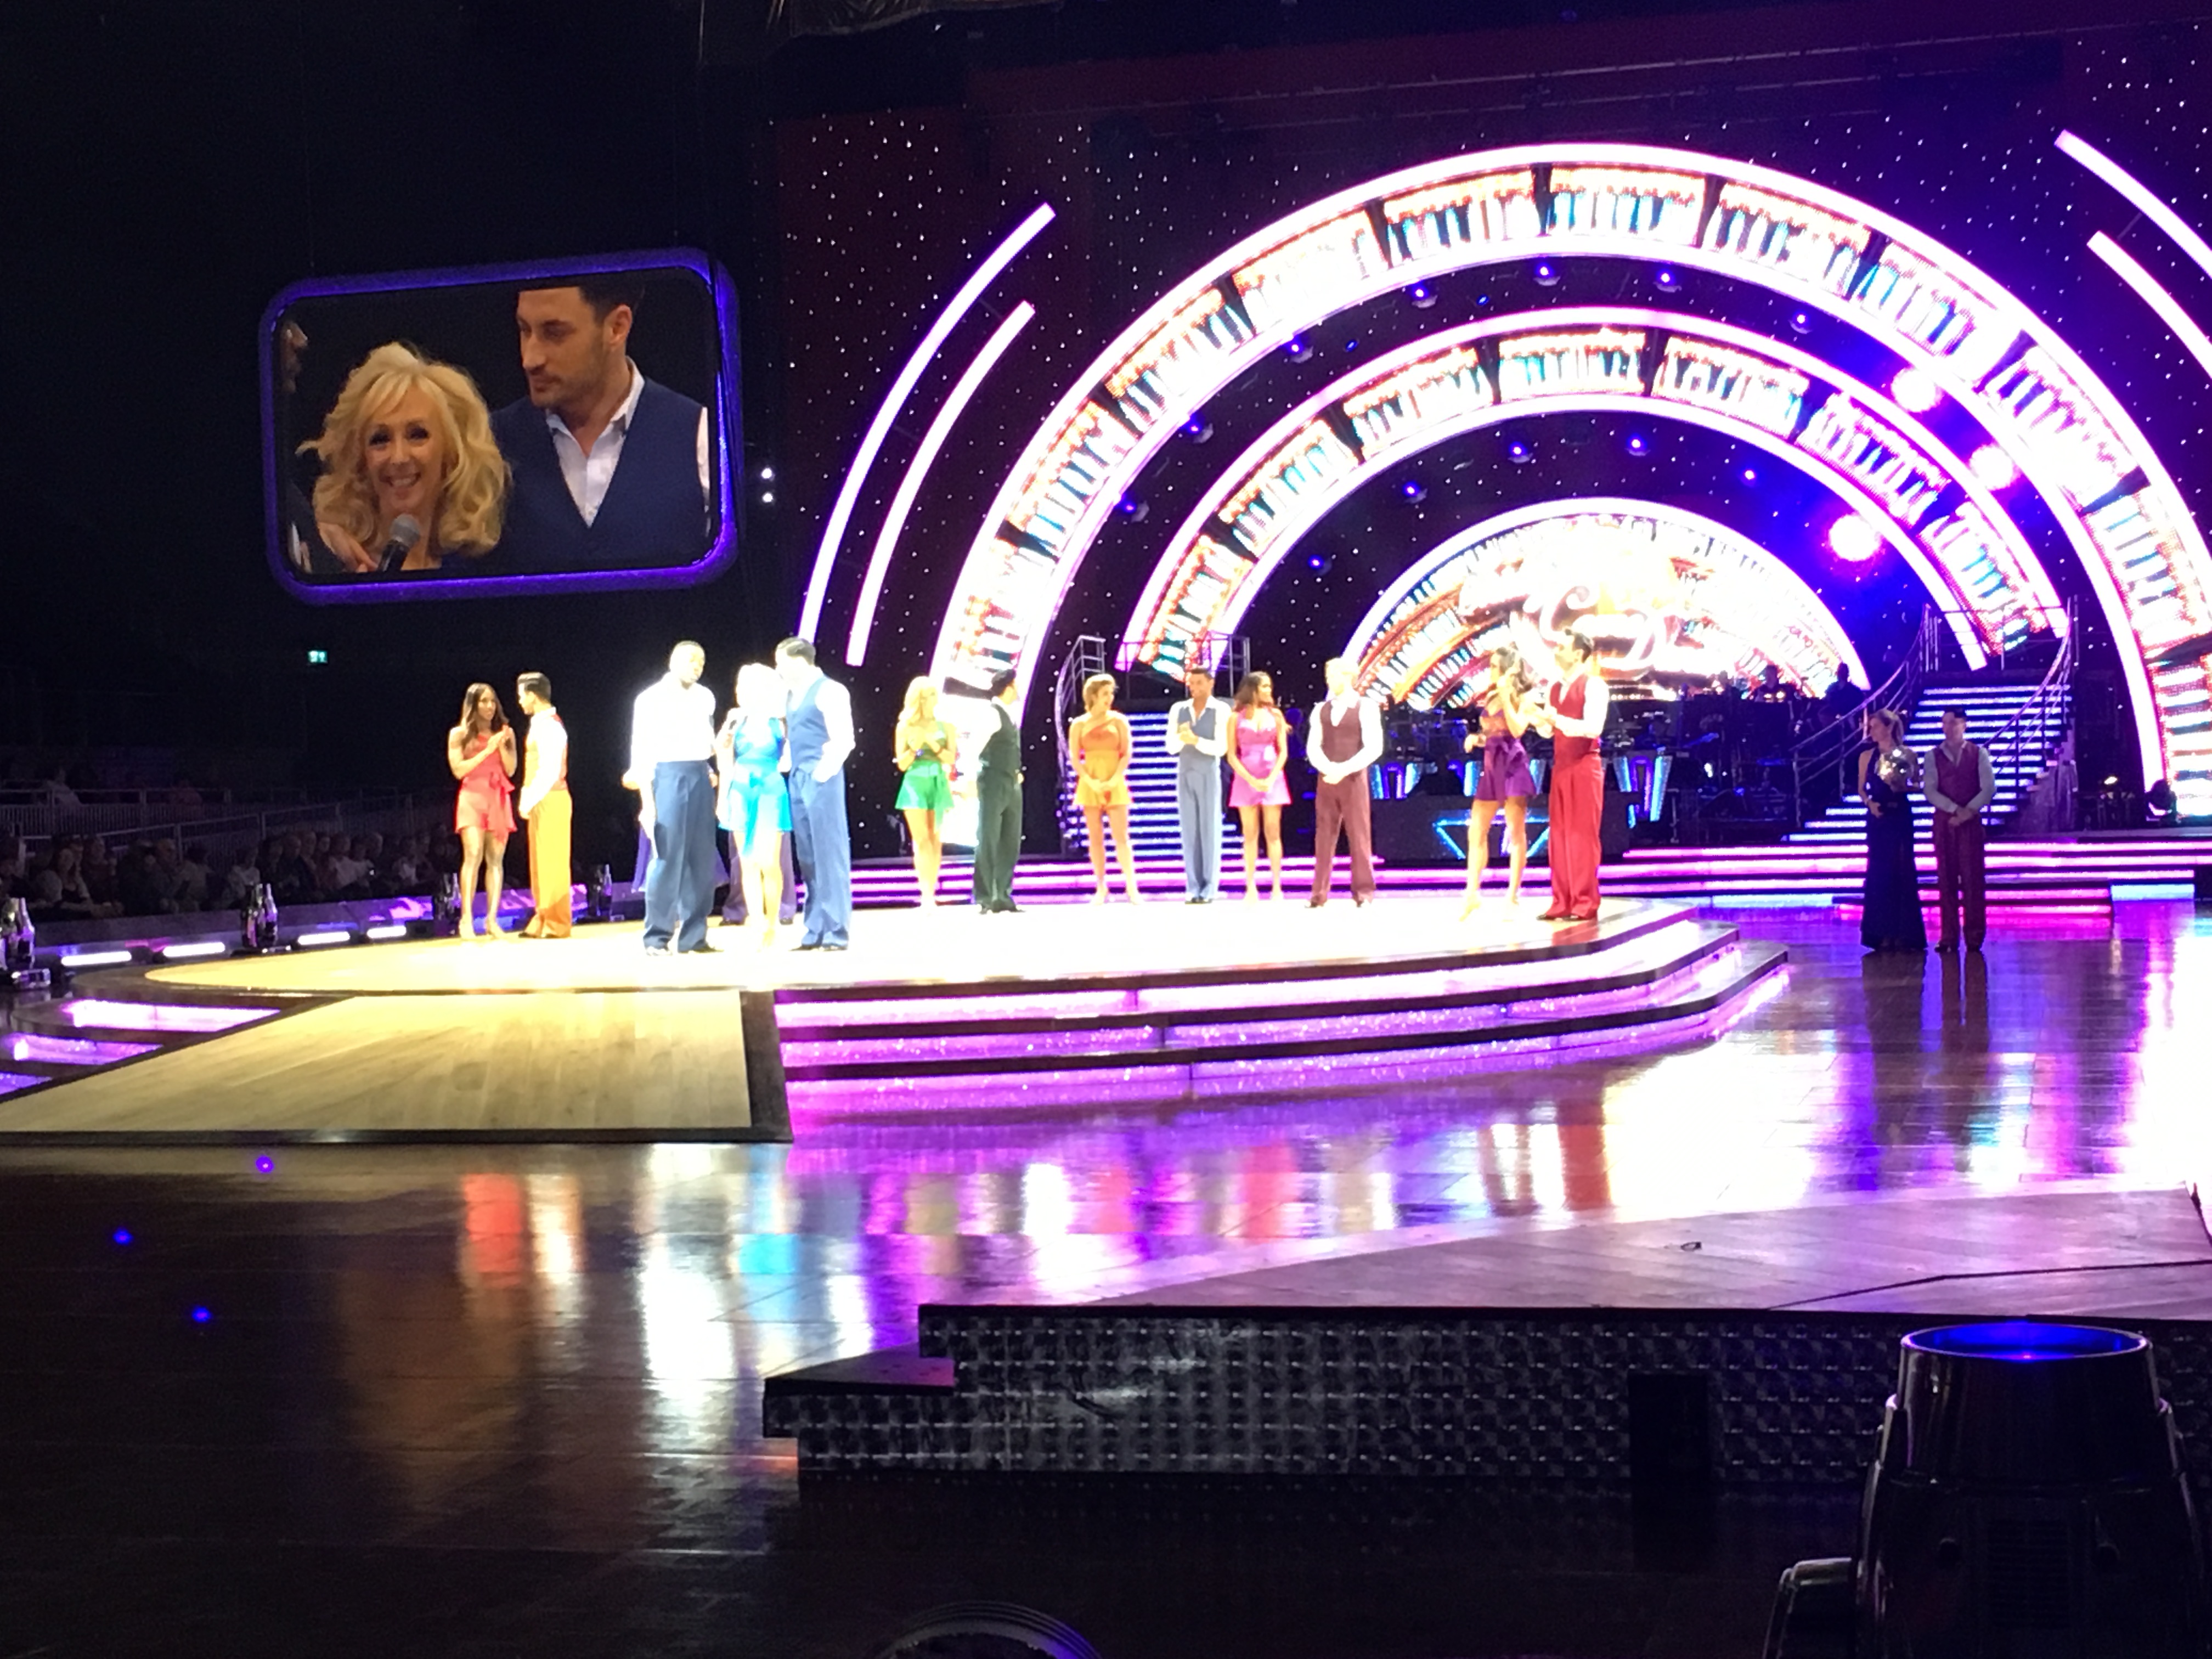 Strictly Live at the 02 – 11 Feb 2018